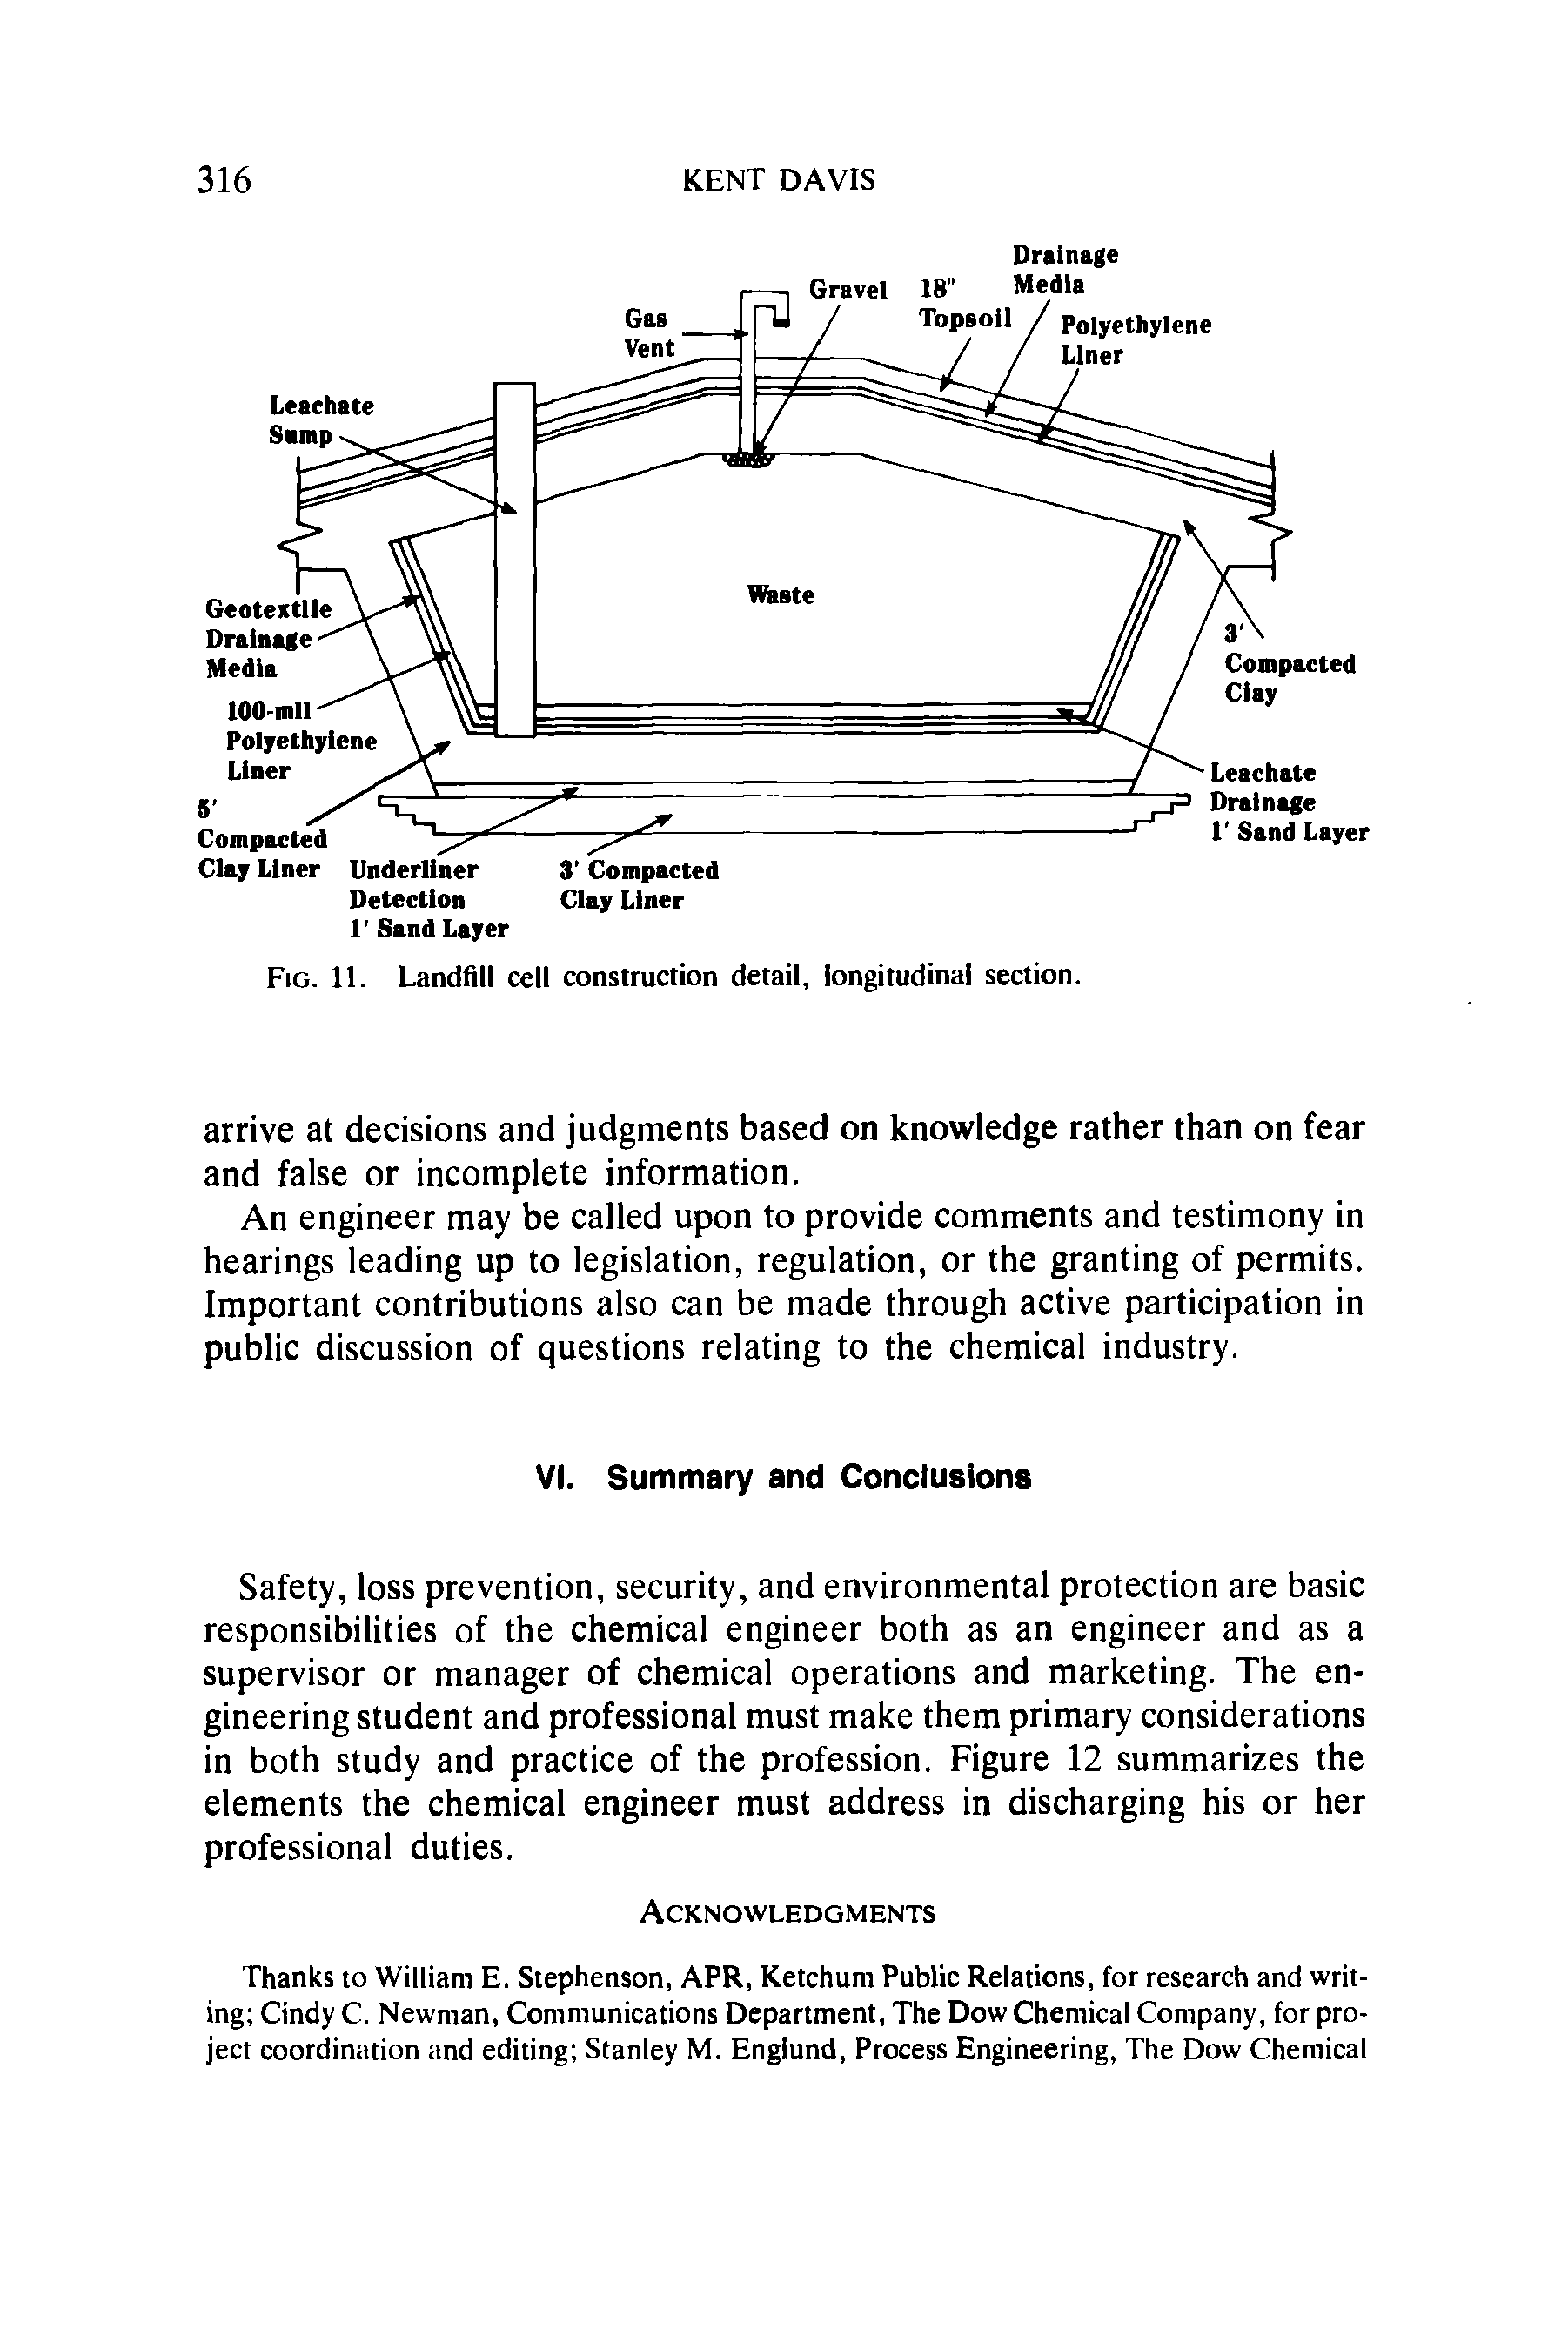 Fig. 11. Landfill cell construction detail, longitudinal section.